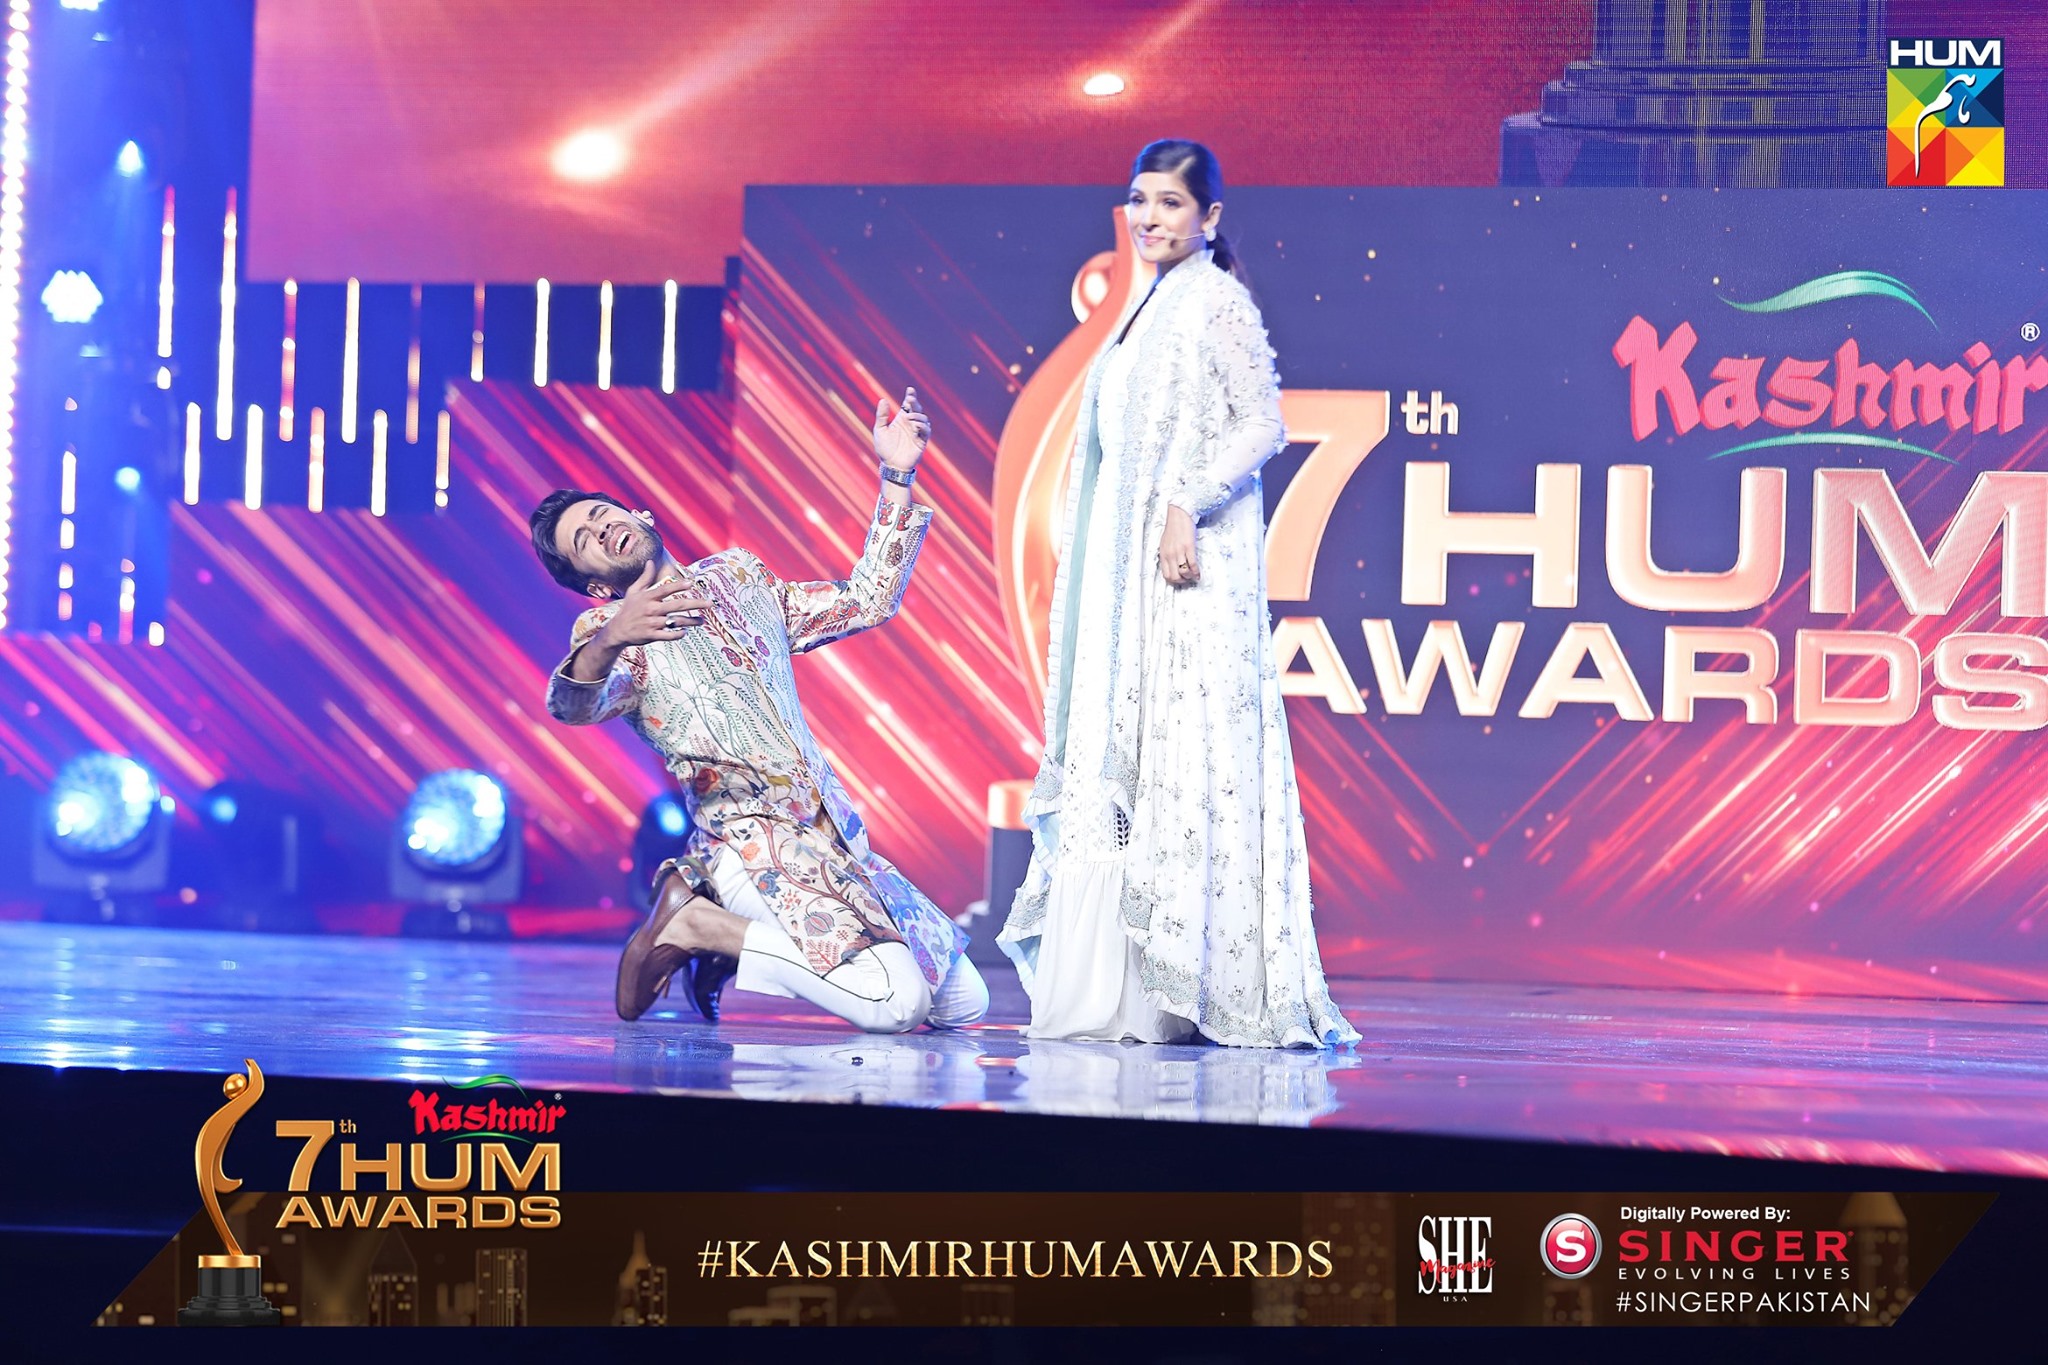 Beautiful Pictures of Pakistan Celebrities from Hum Awards 2019